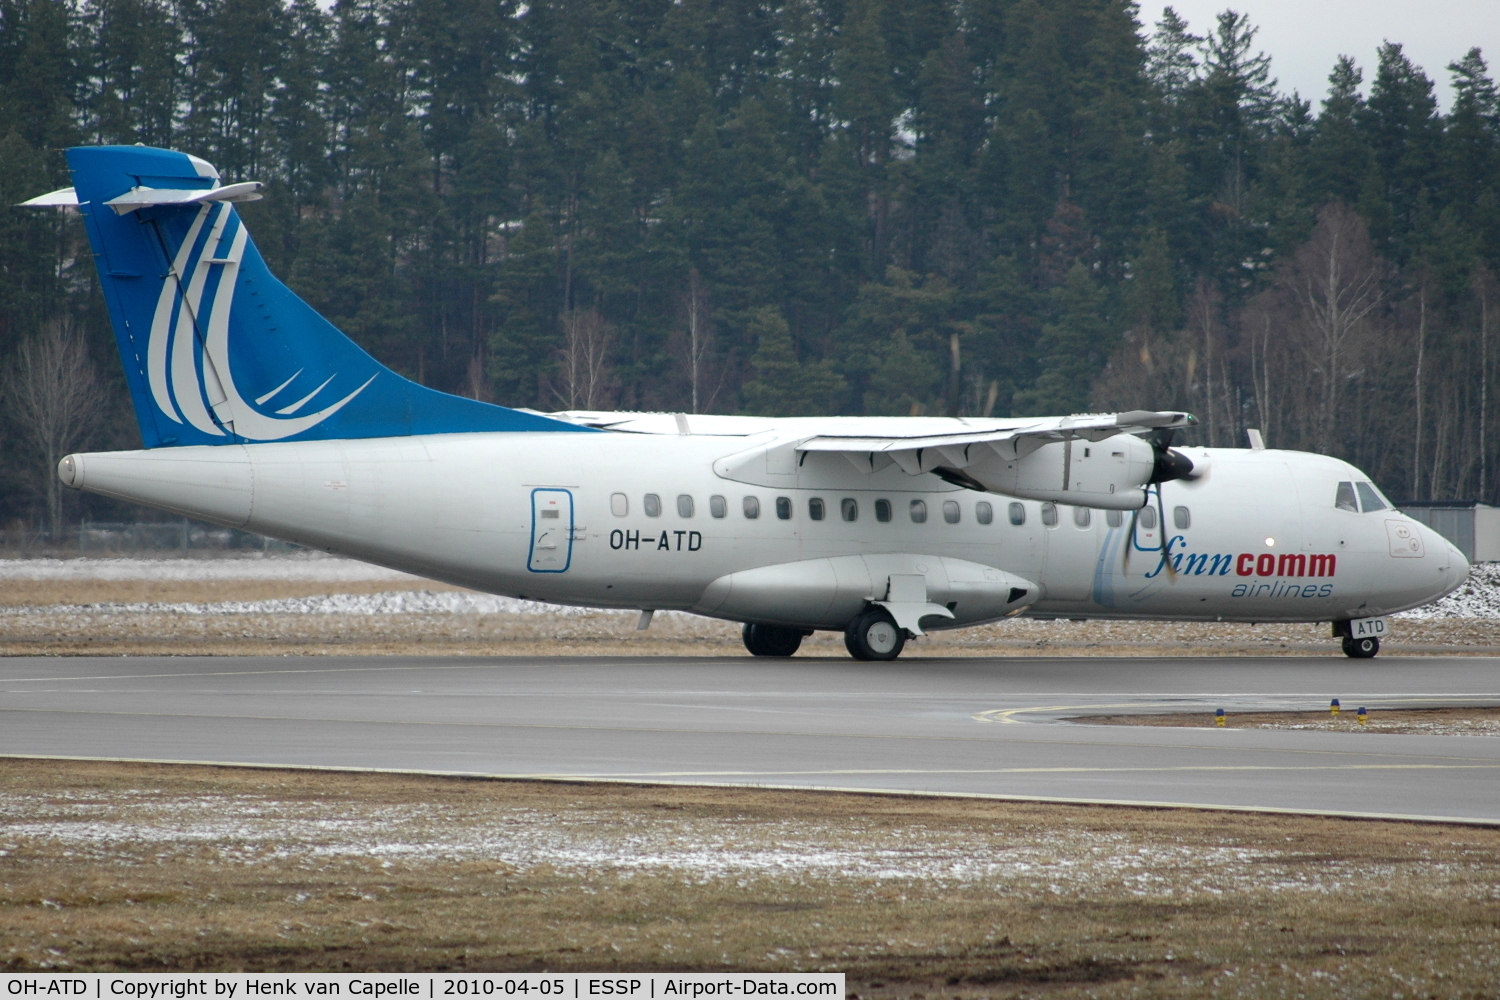 OH-ATD, 2006 ATR 42-500 C/N 655, Finncomm Airlines ATR-42-500 starting up on the runway of Norrköping Kungsängen airport for a flight to Helsinki, Sweden.